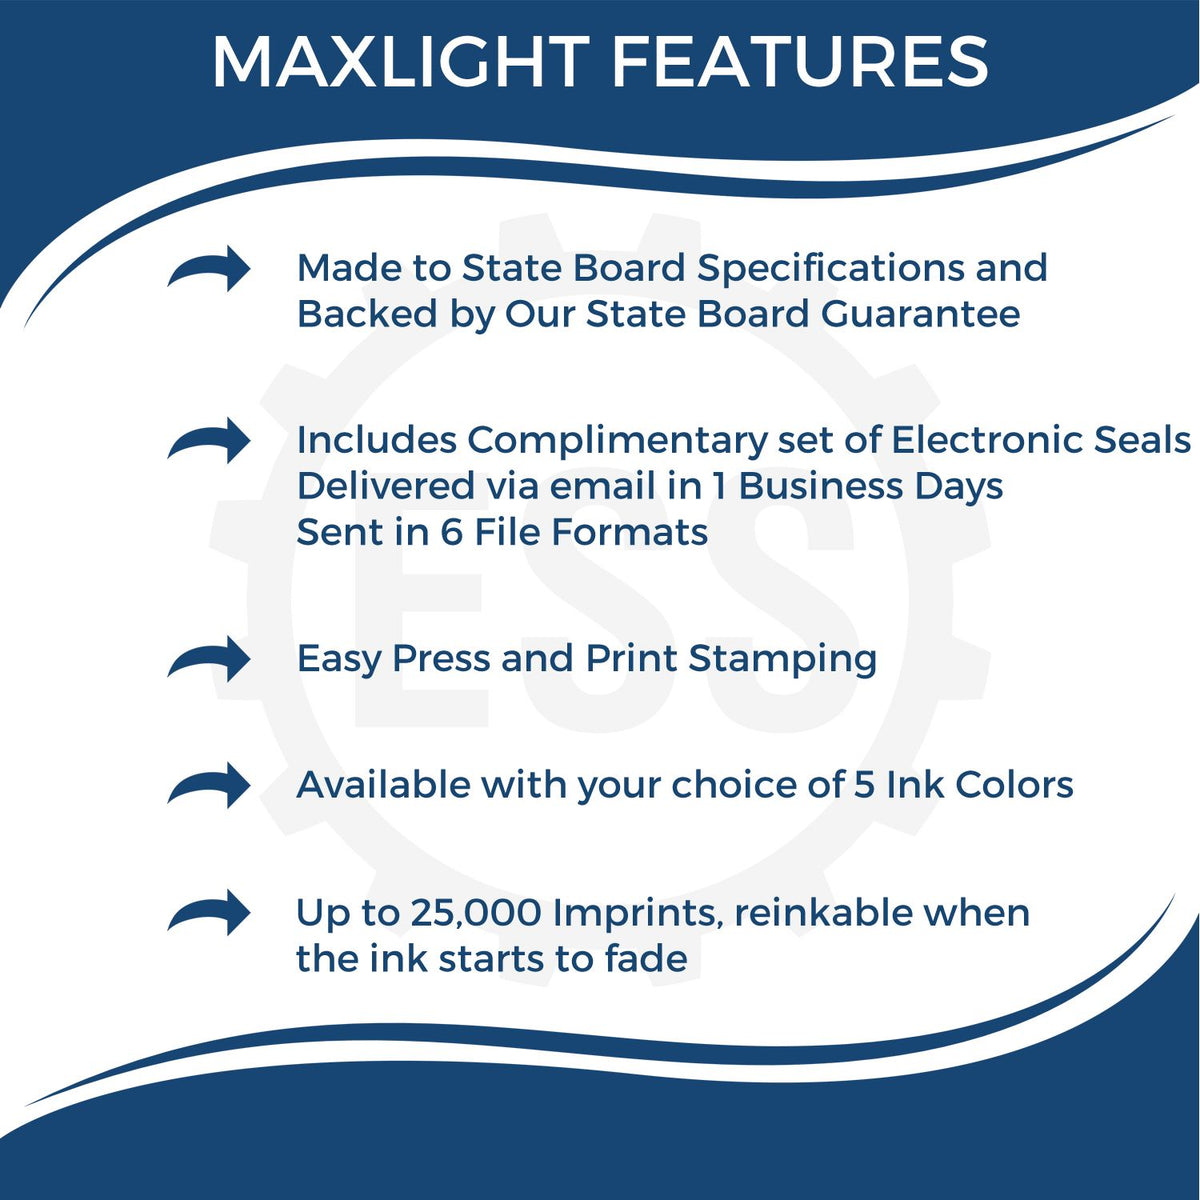 A picture of an infographic highlighting the selling points for the MaxLight Premium Pre-Inked New Jersey State Seal Notarial Stamp